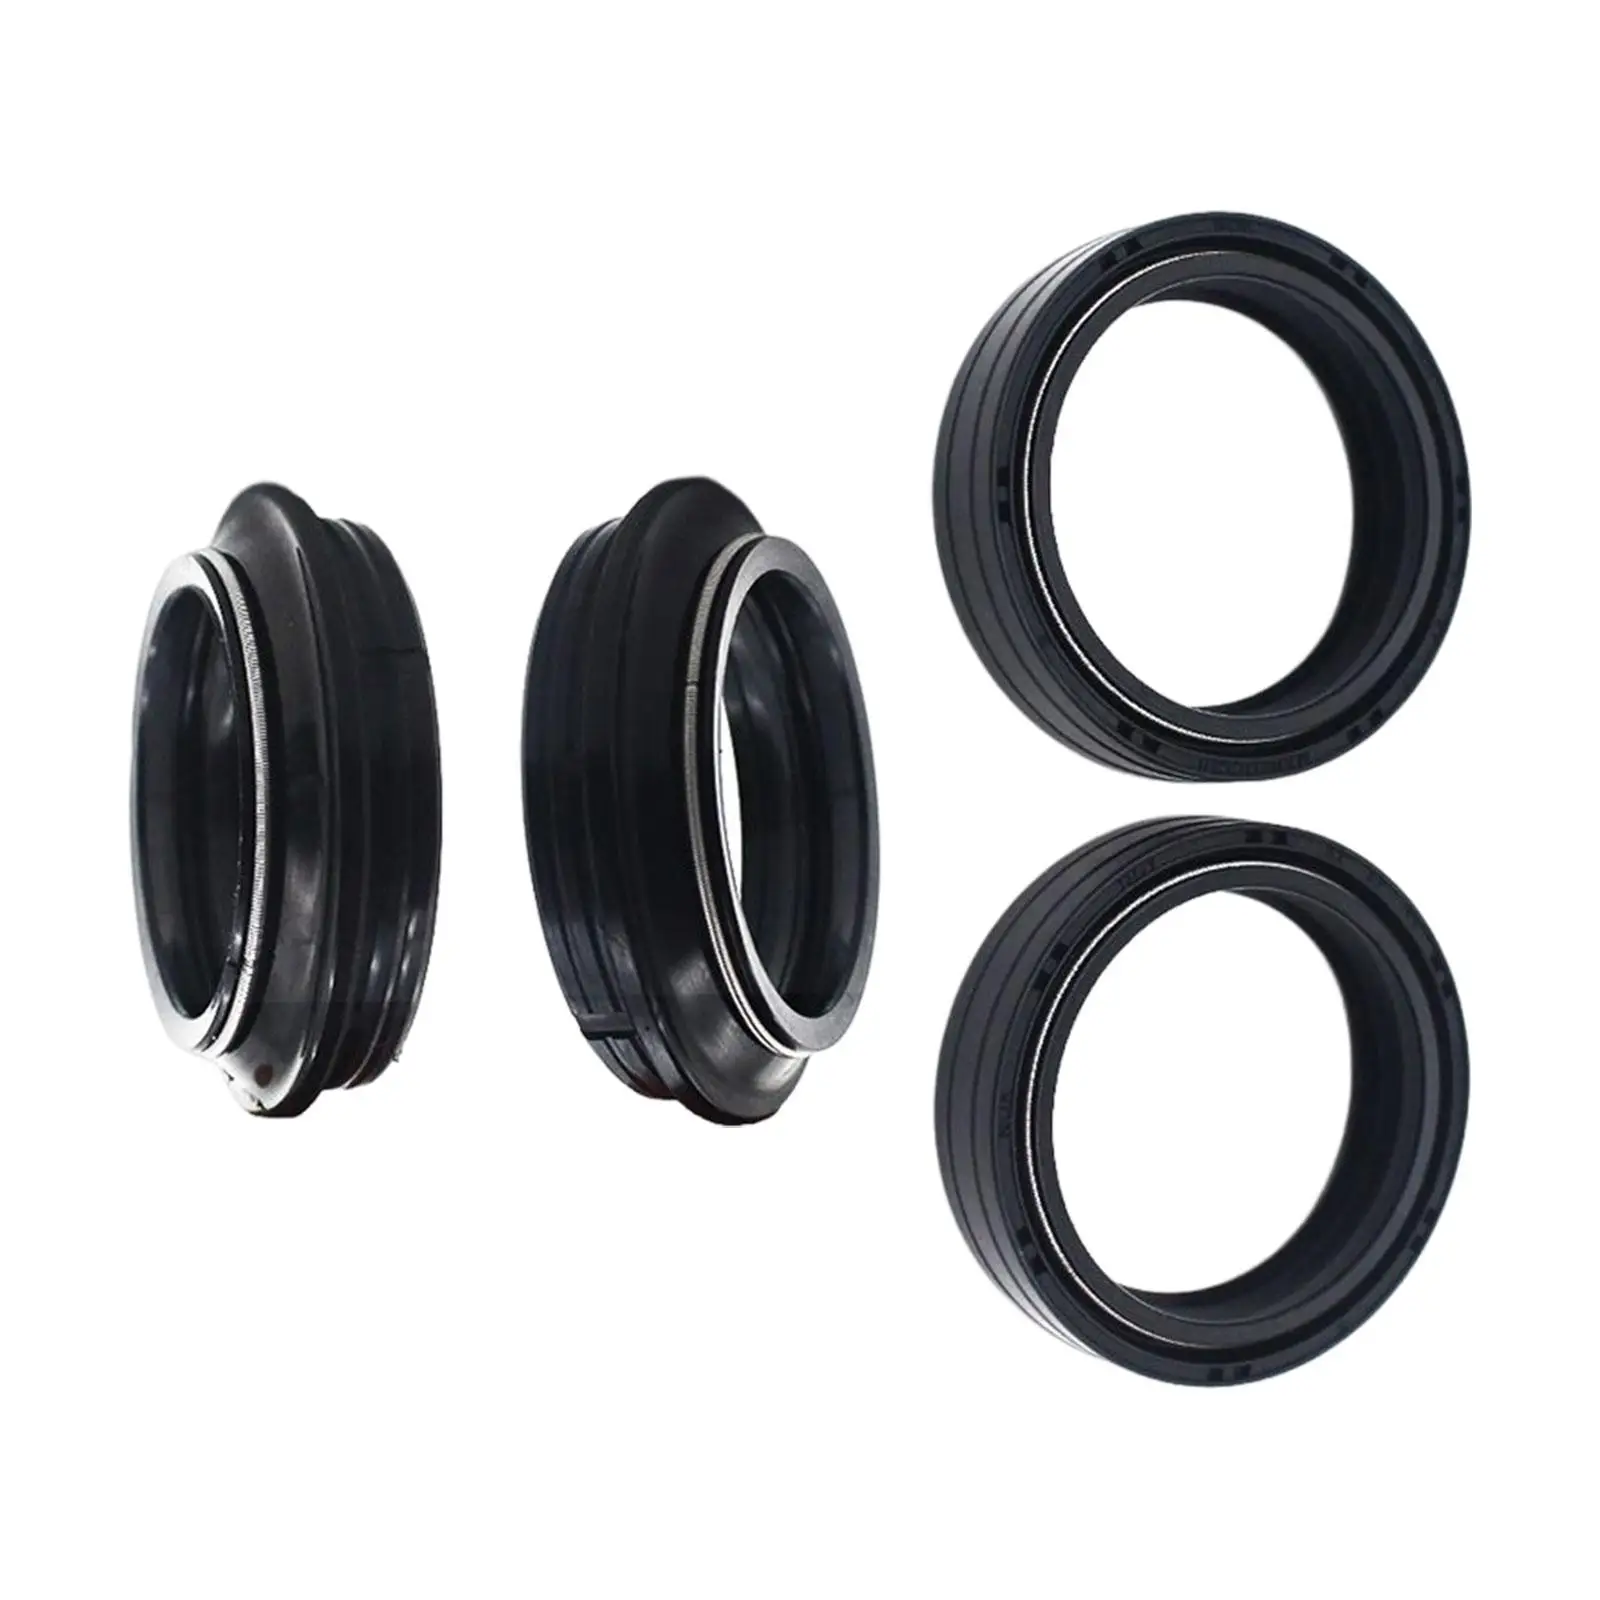 Front Fork Shock Oil Seal and Dust Seal Set Rubber Motorcycle Accessories for